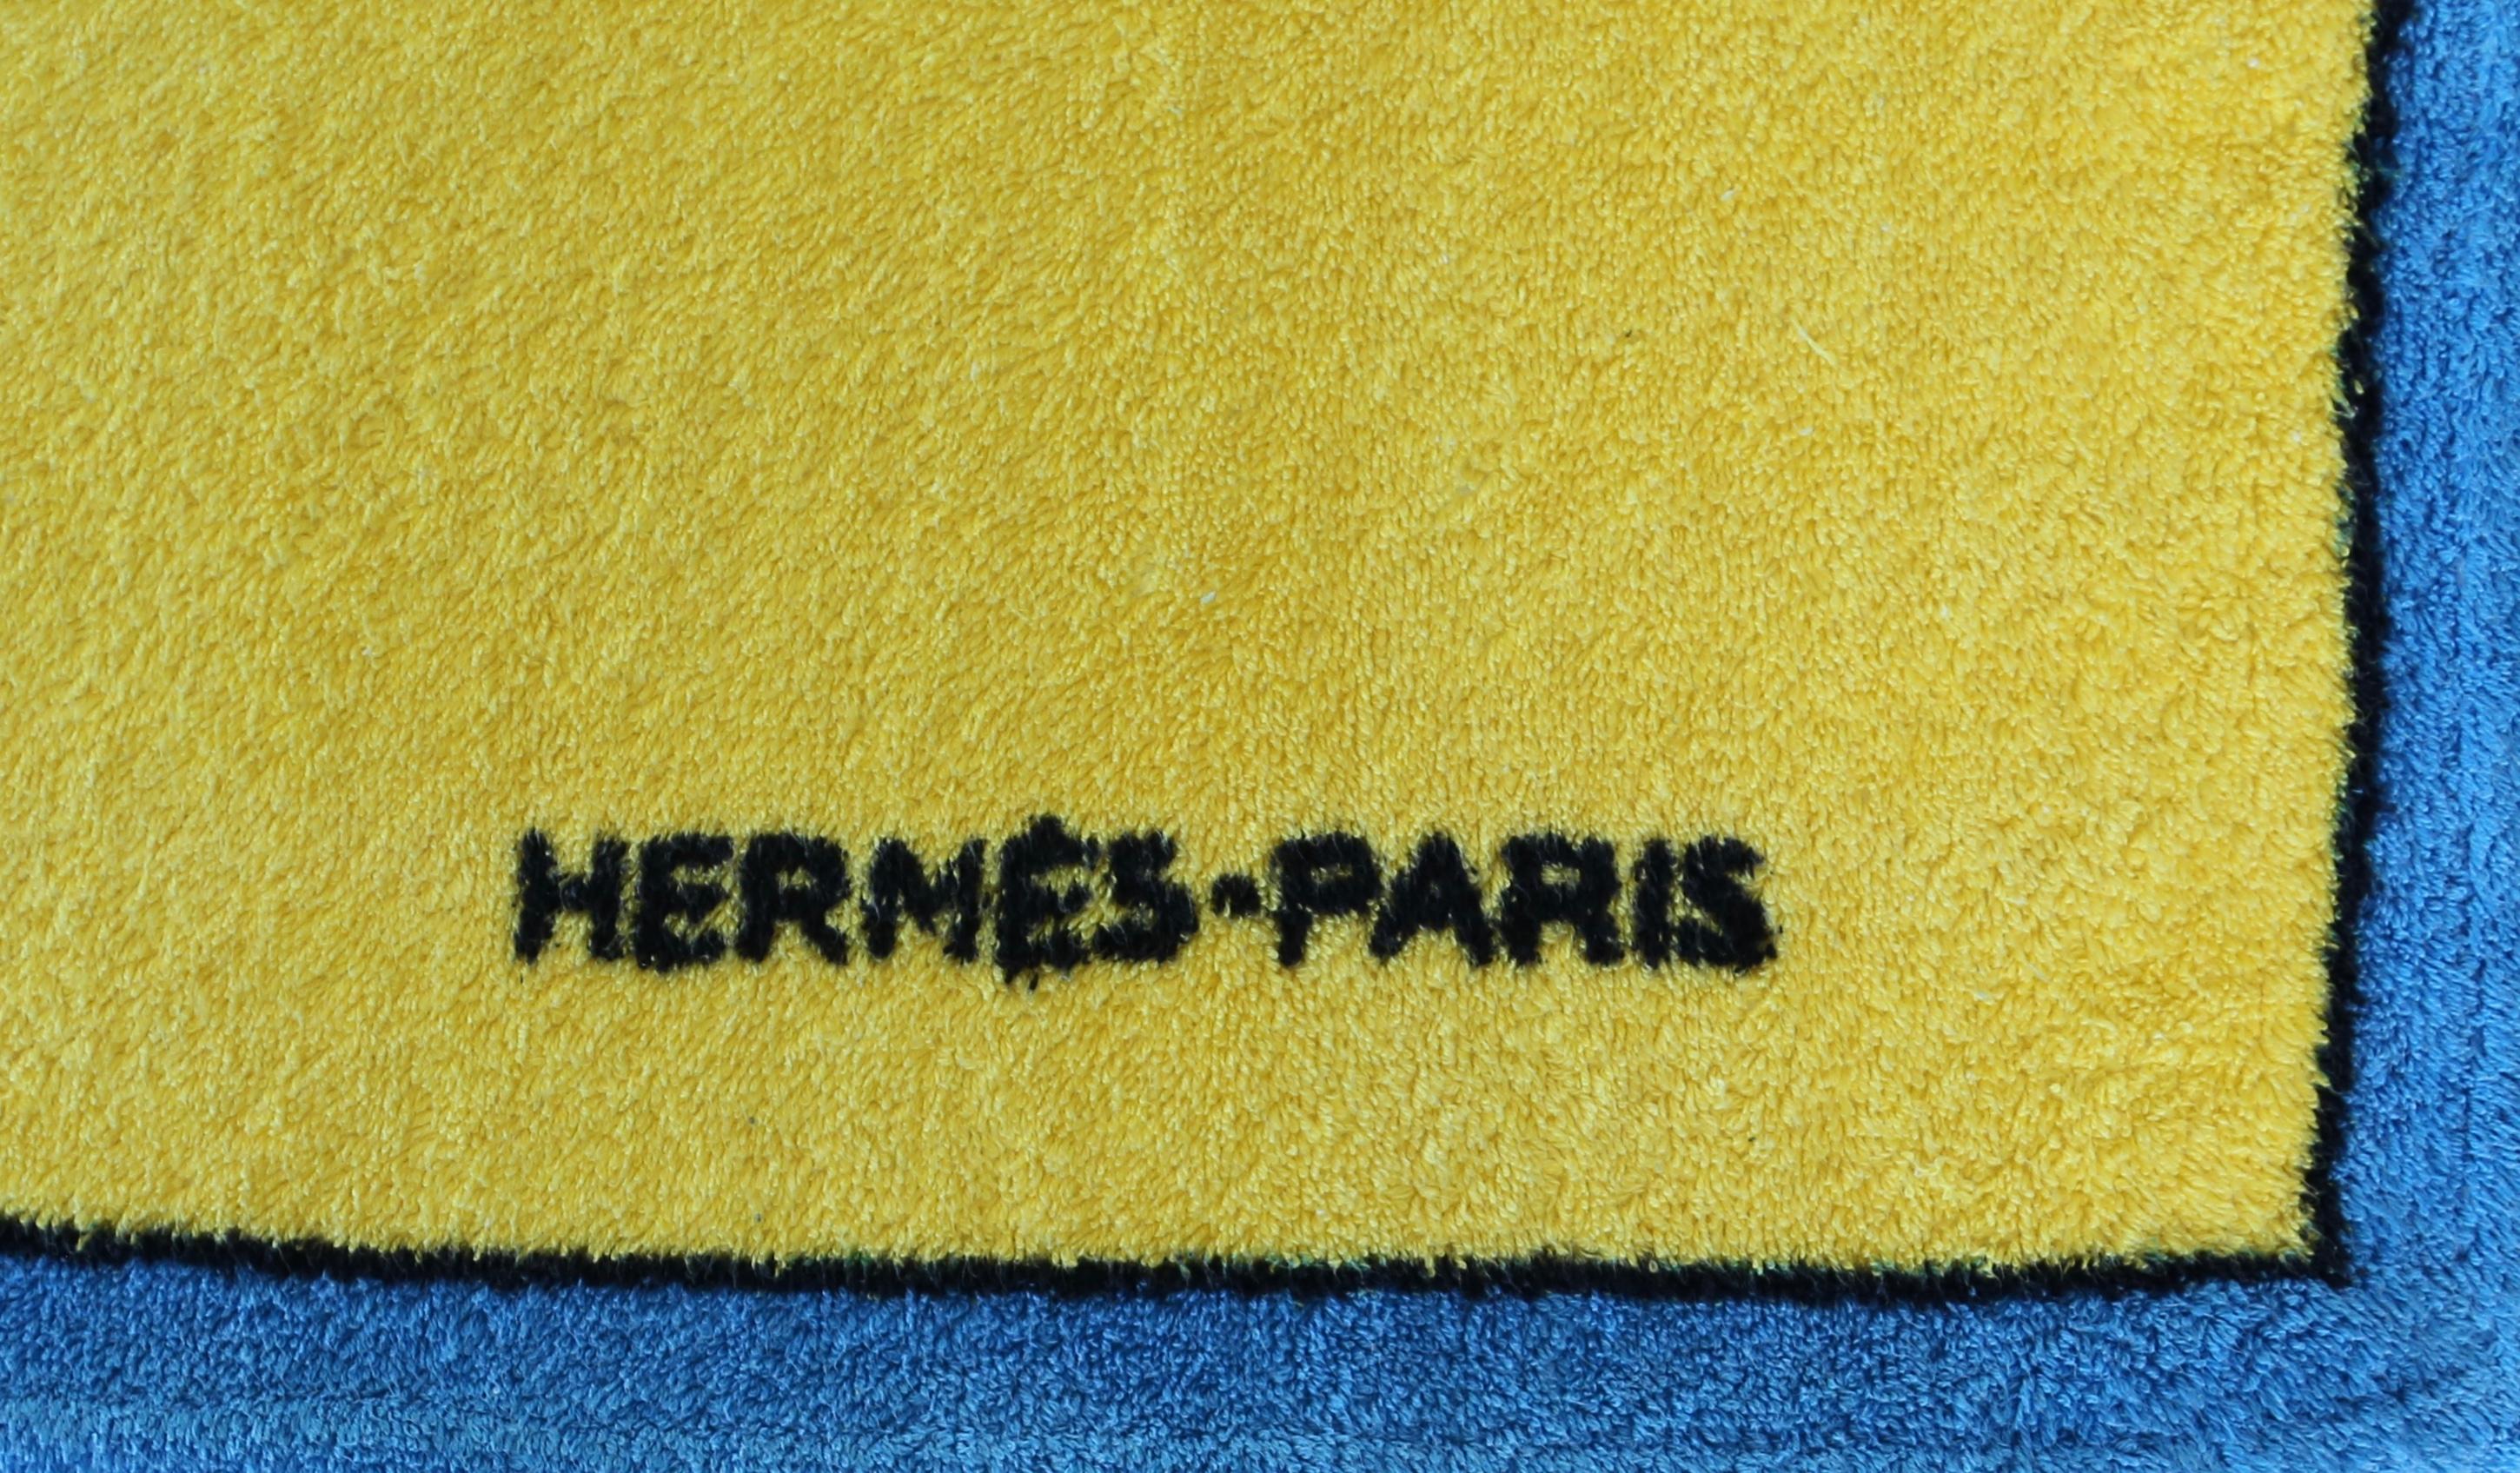 Yellow 1990's HERMES equestrian printed cotton terry cloth beach towel